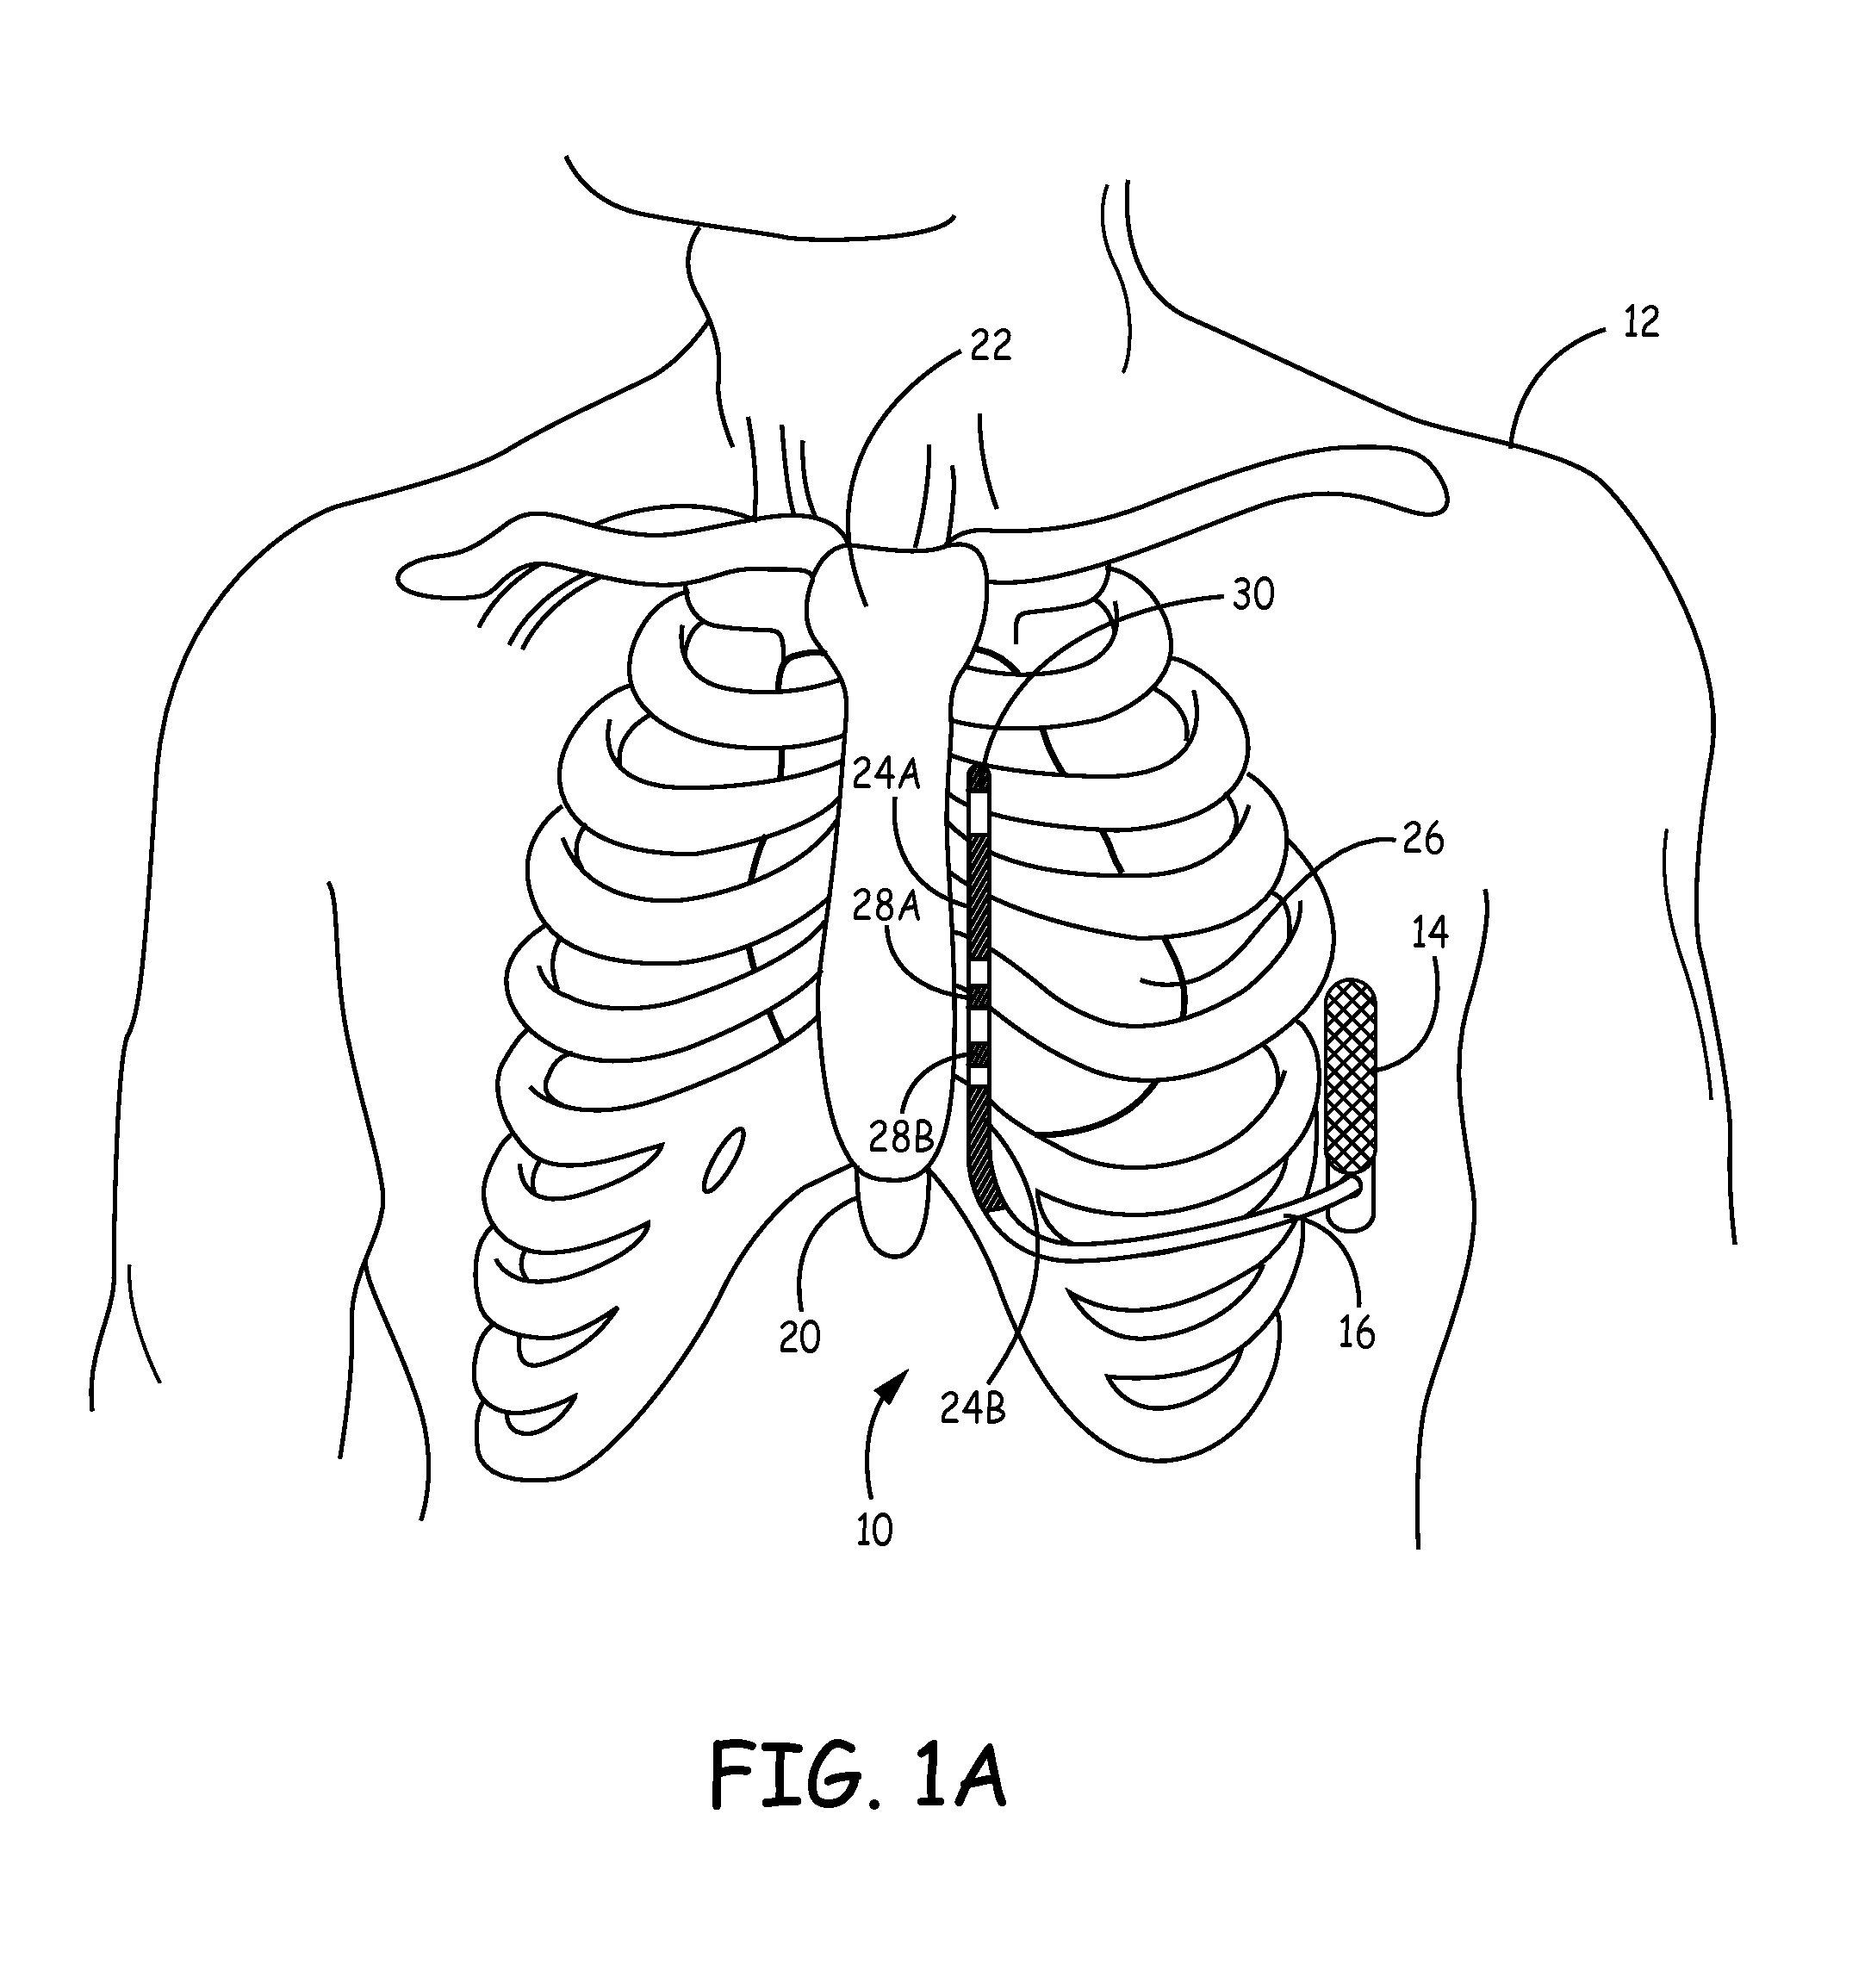 Implantable extravascular electrical stimulation lead having improved sensing and pacing capability